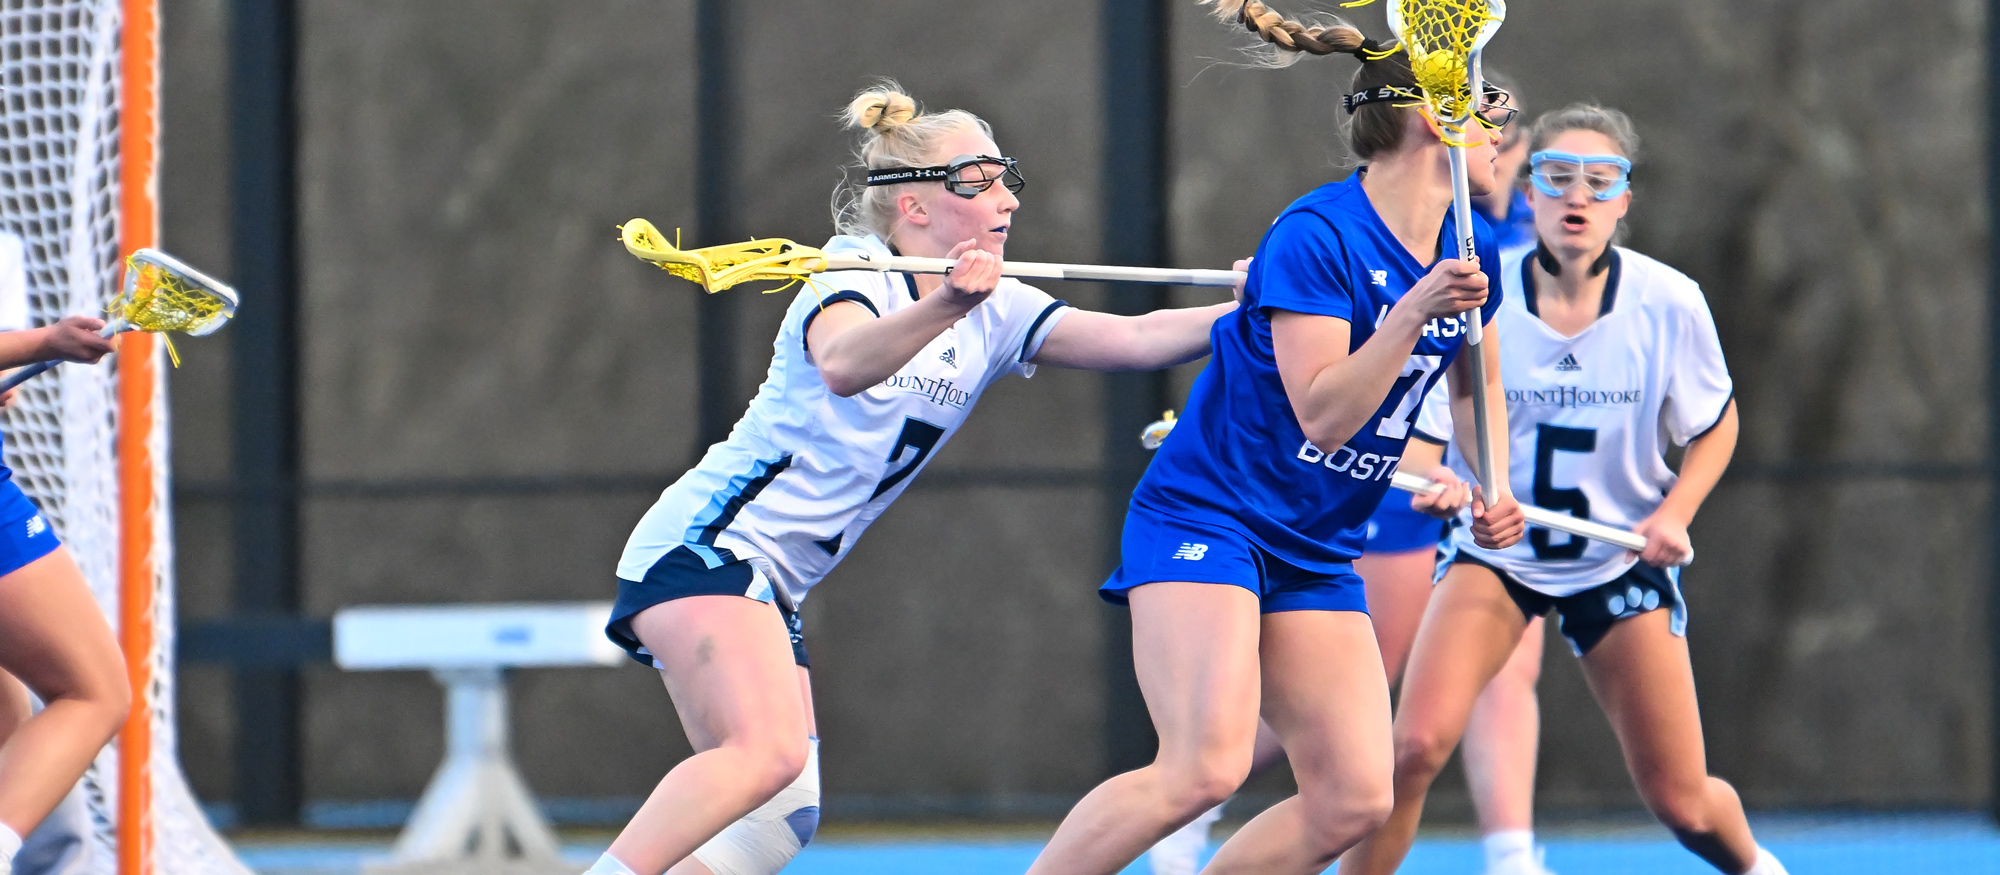 Caroline Thompson (left) and Jane Harmon (right) played key parts in a stout defensive effort by Mount Holyoke against Clark University on April 13, 2024. (RJB Sports file photo)